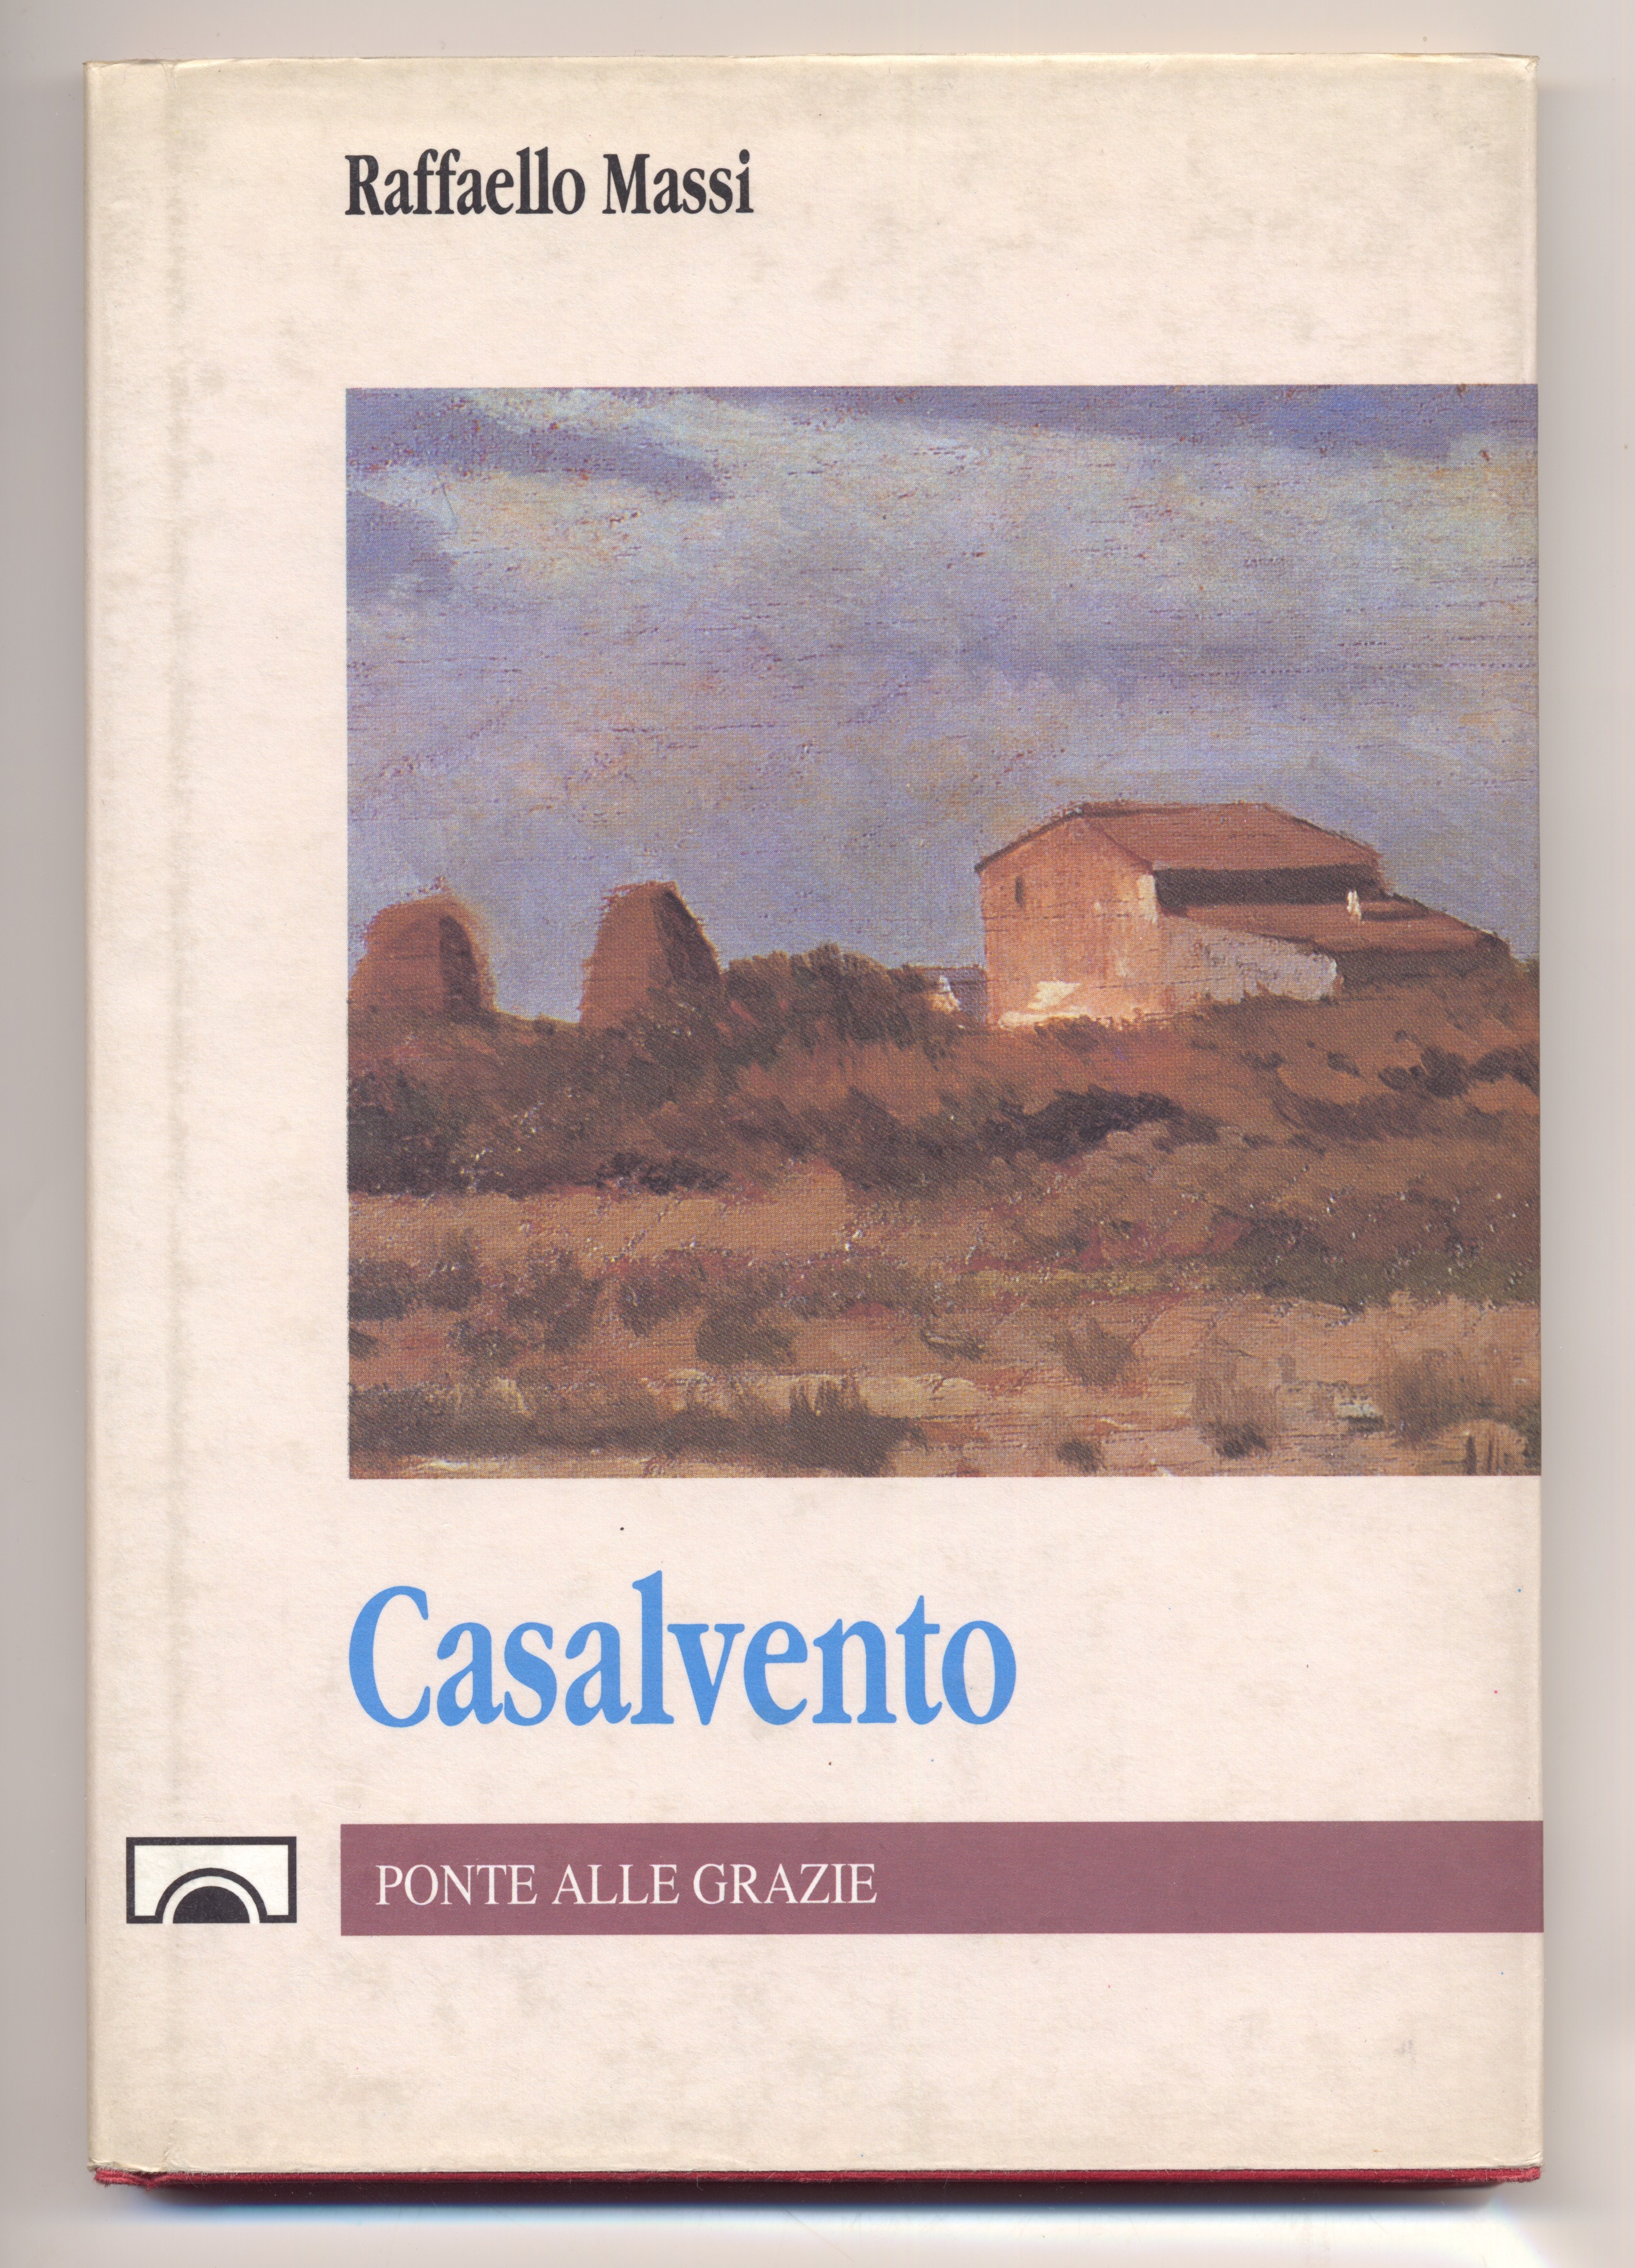 Cover of the book by Raffaello Massi entitled "Casalvento". The history of life in the Tuscan countryside in the years of classical agriculture